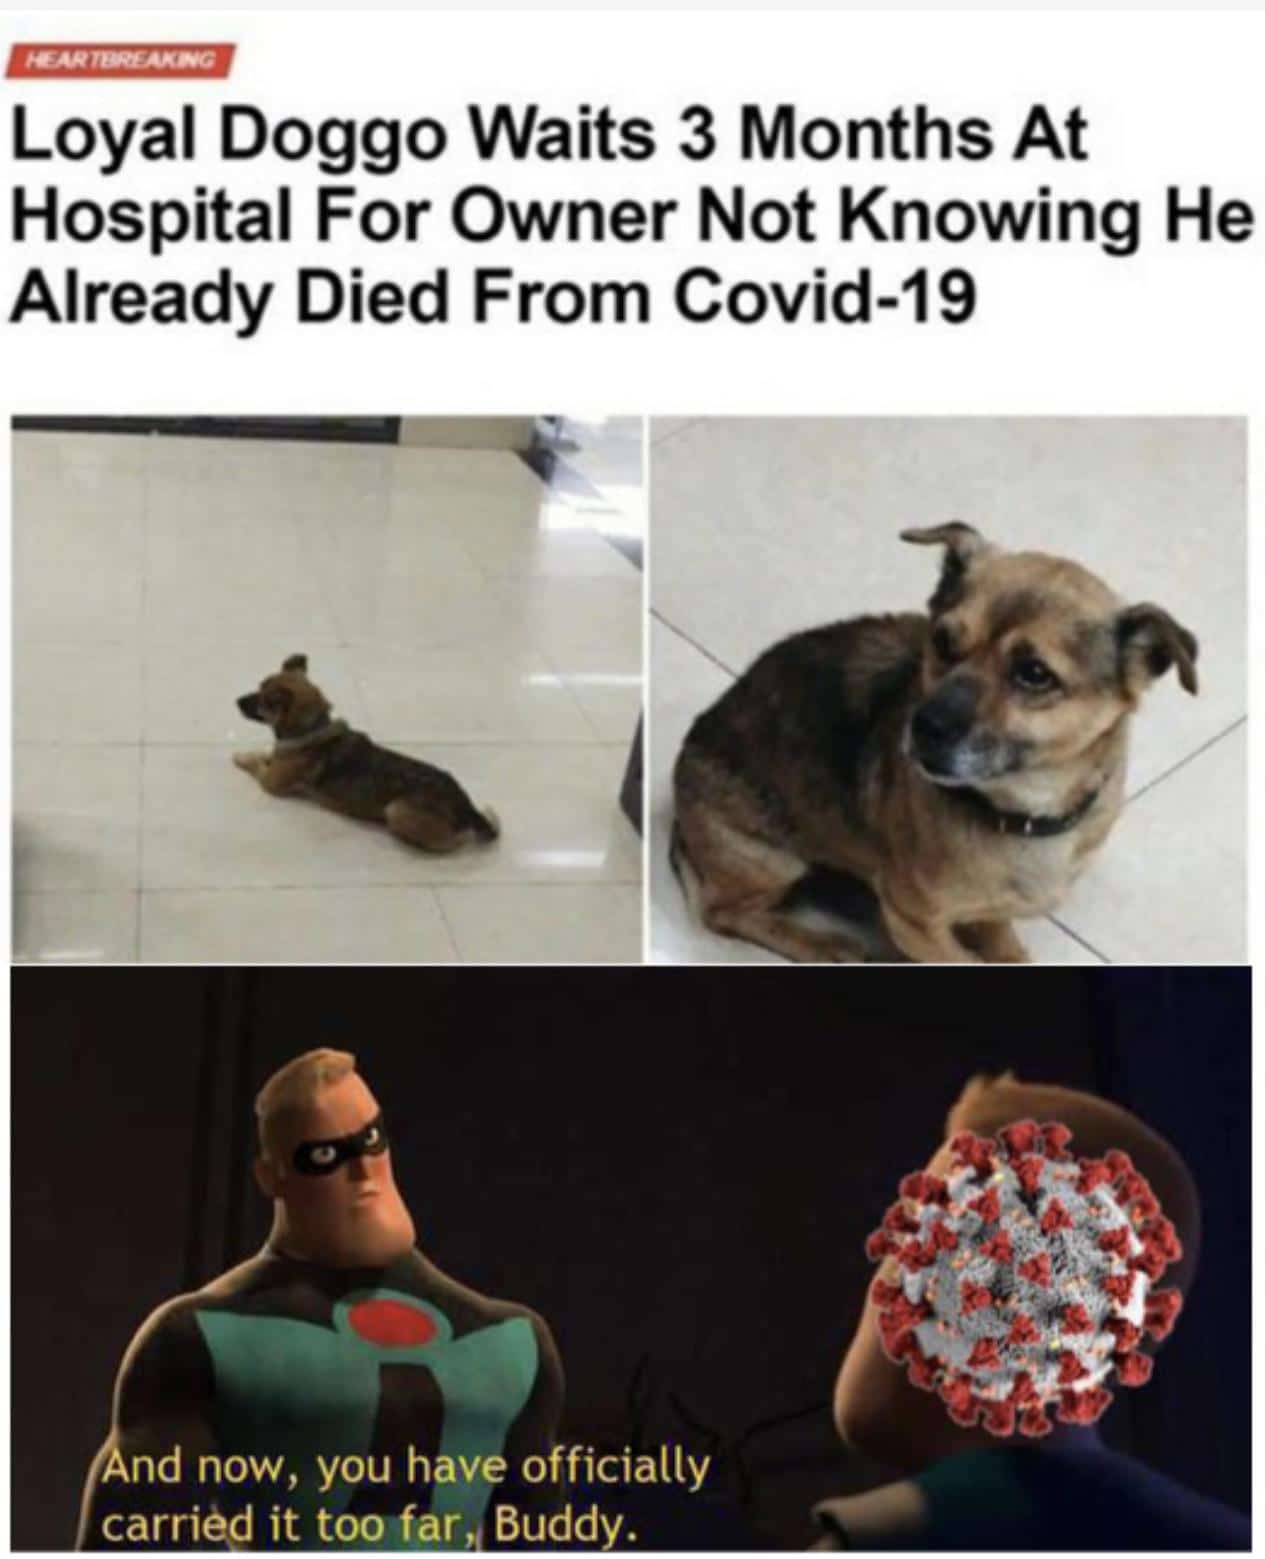 Funny, Futurama, Hachiko, COVID, Seymour, Fry other memes Funny, Futurama, Hachiko, COVID, Seymour, Fry text: Loyal Doggo Waits 3 Months At Hospital For Owner Not Knowing He Already Died From Covid-19 nd now, you have officially carriéd it too far Budd . 